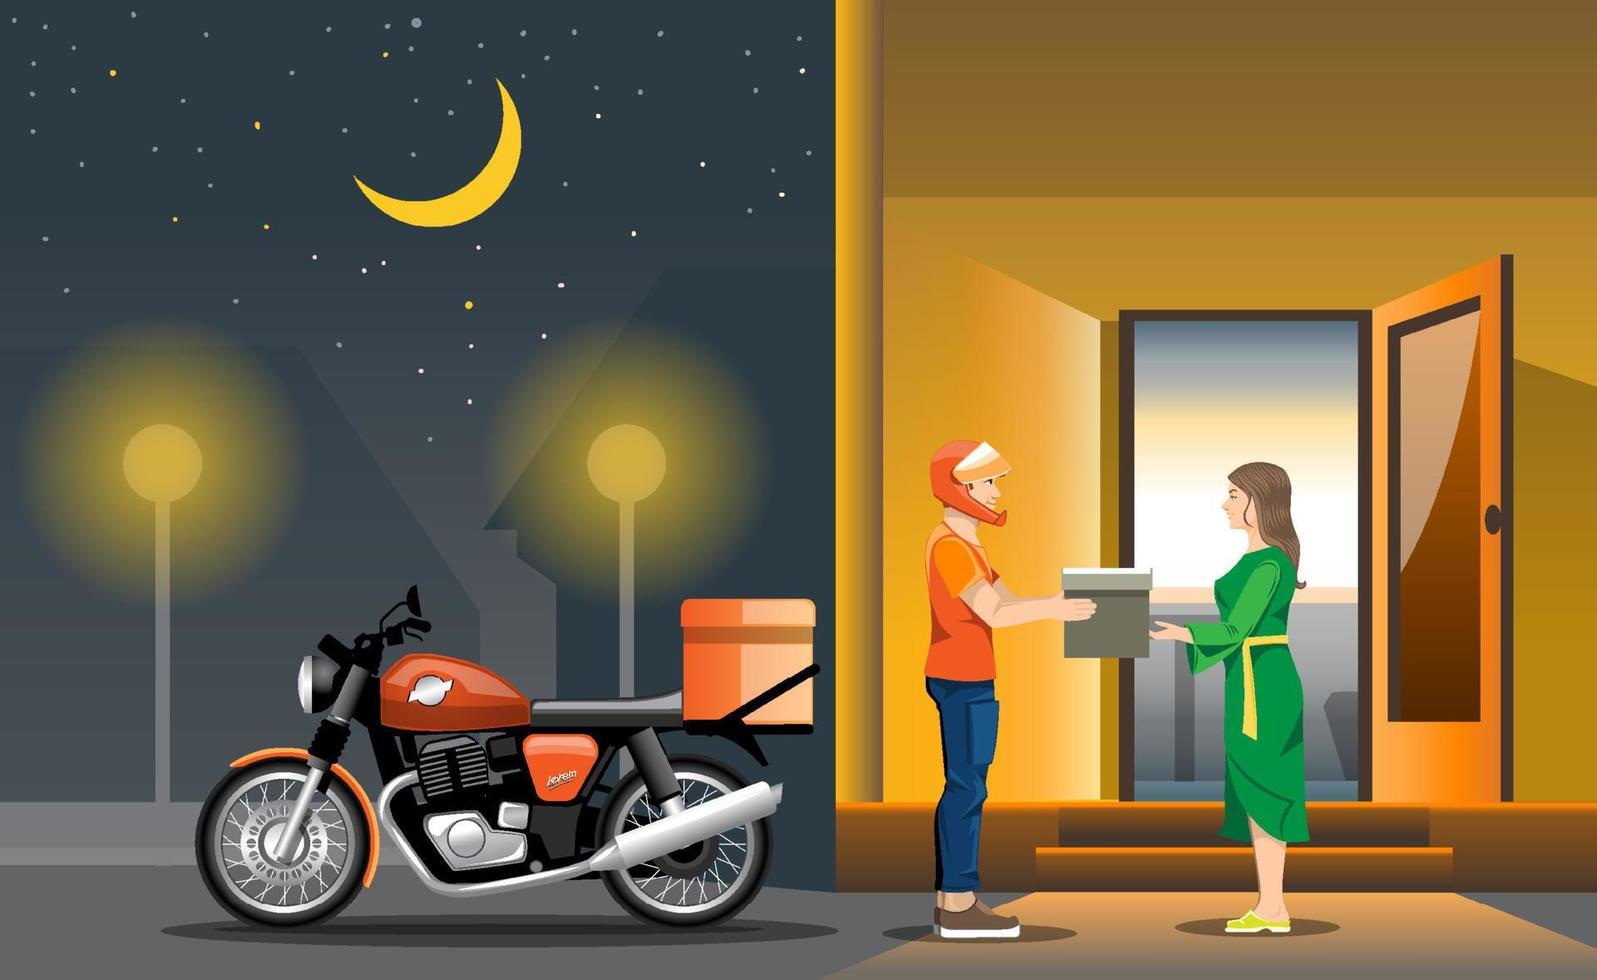 Illustration with a motorcycle on the street at night and a delivery man giving an order to a girl. vector